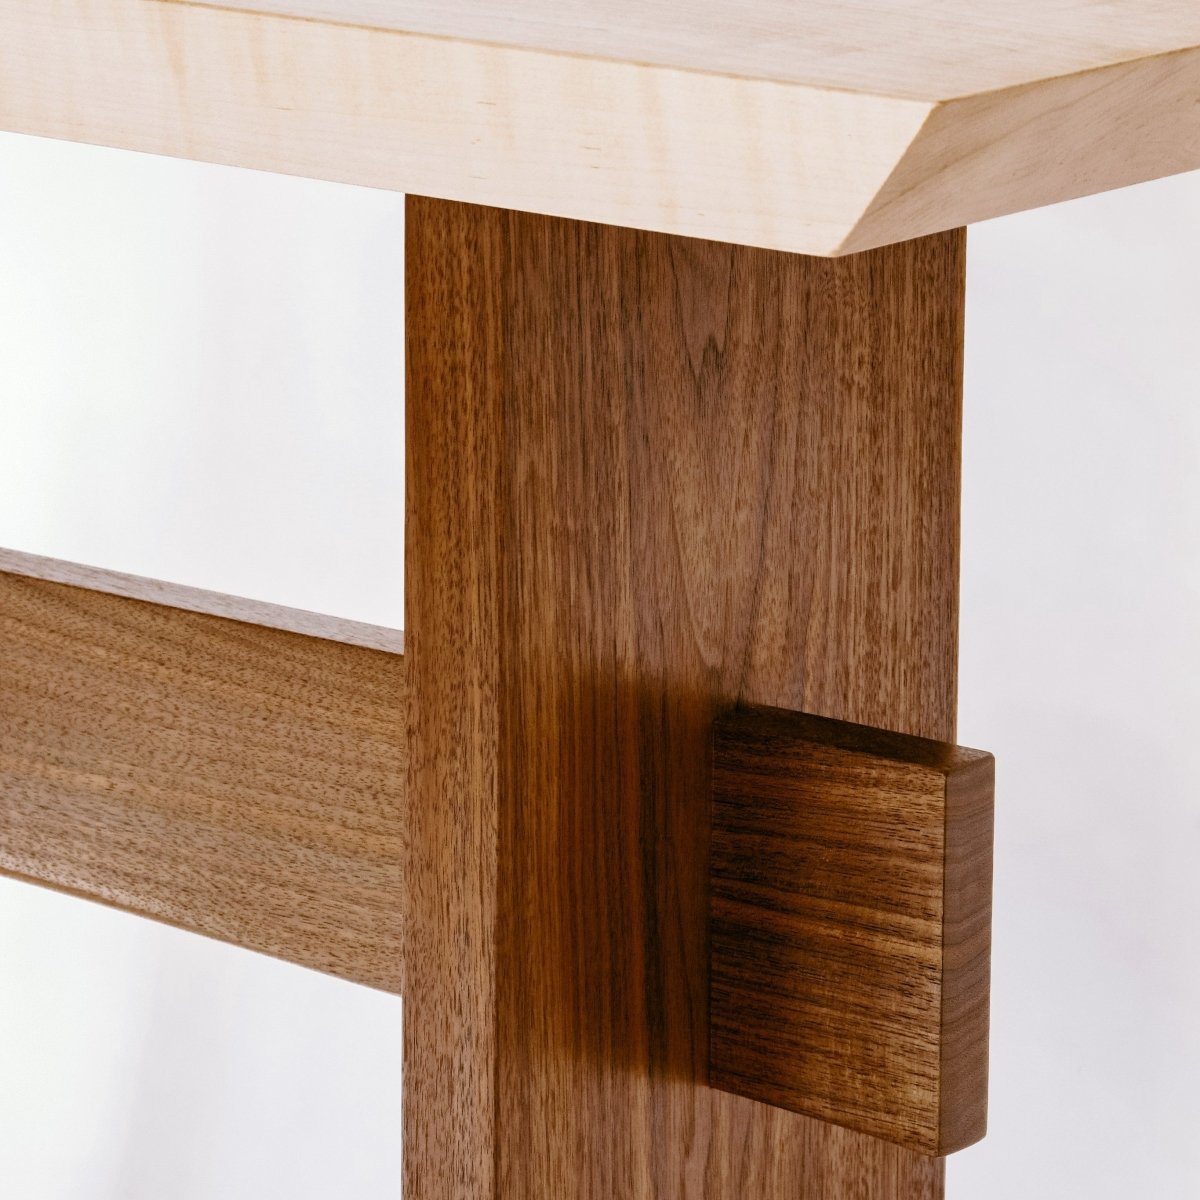 tiger maple table top and solid walnut table base on this minimalist hallway table design by Mokuzai Furniture